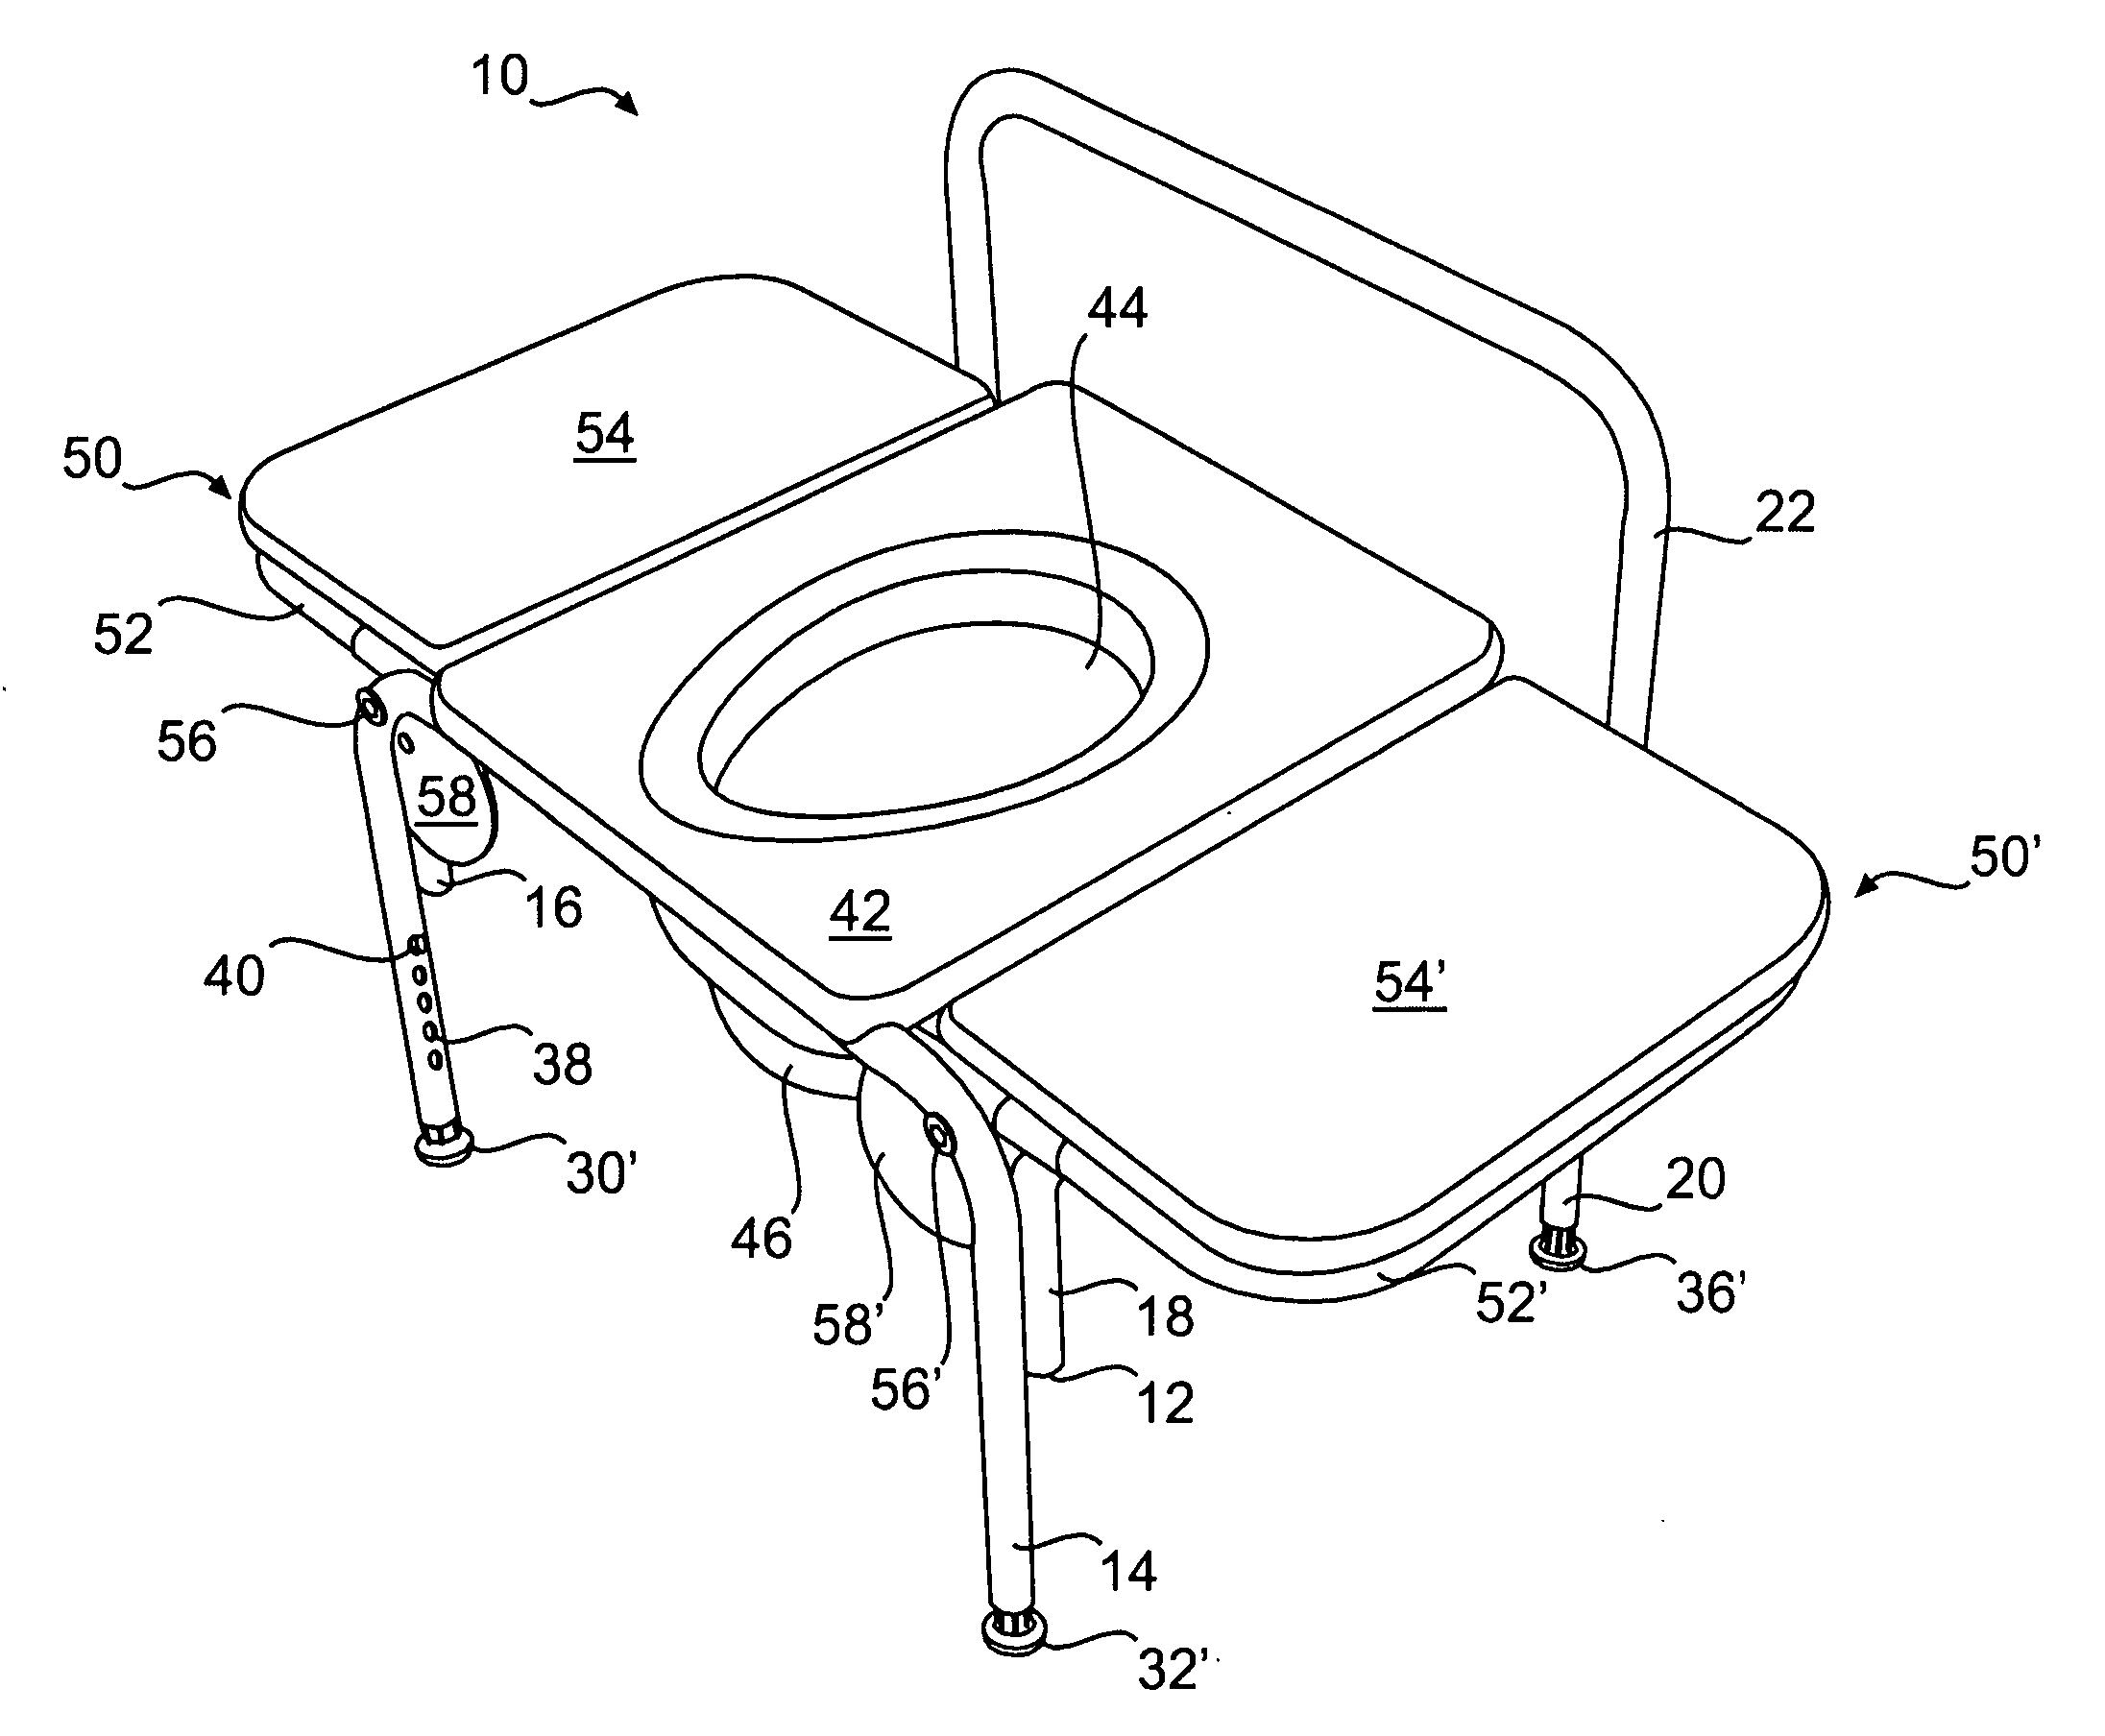 Transfer seat with rotatable wing